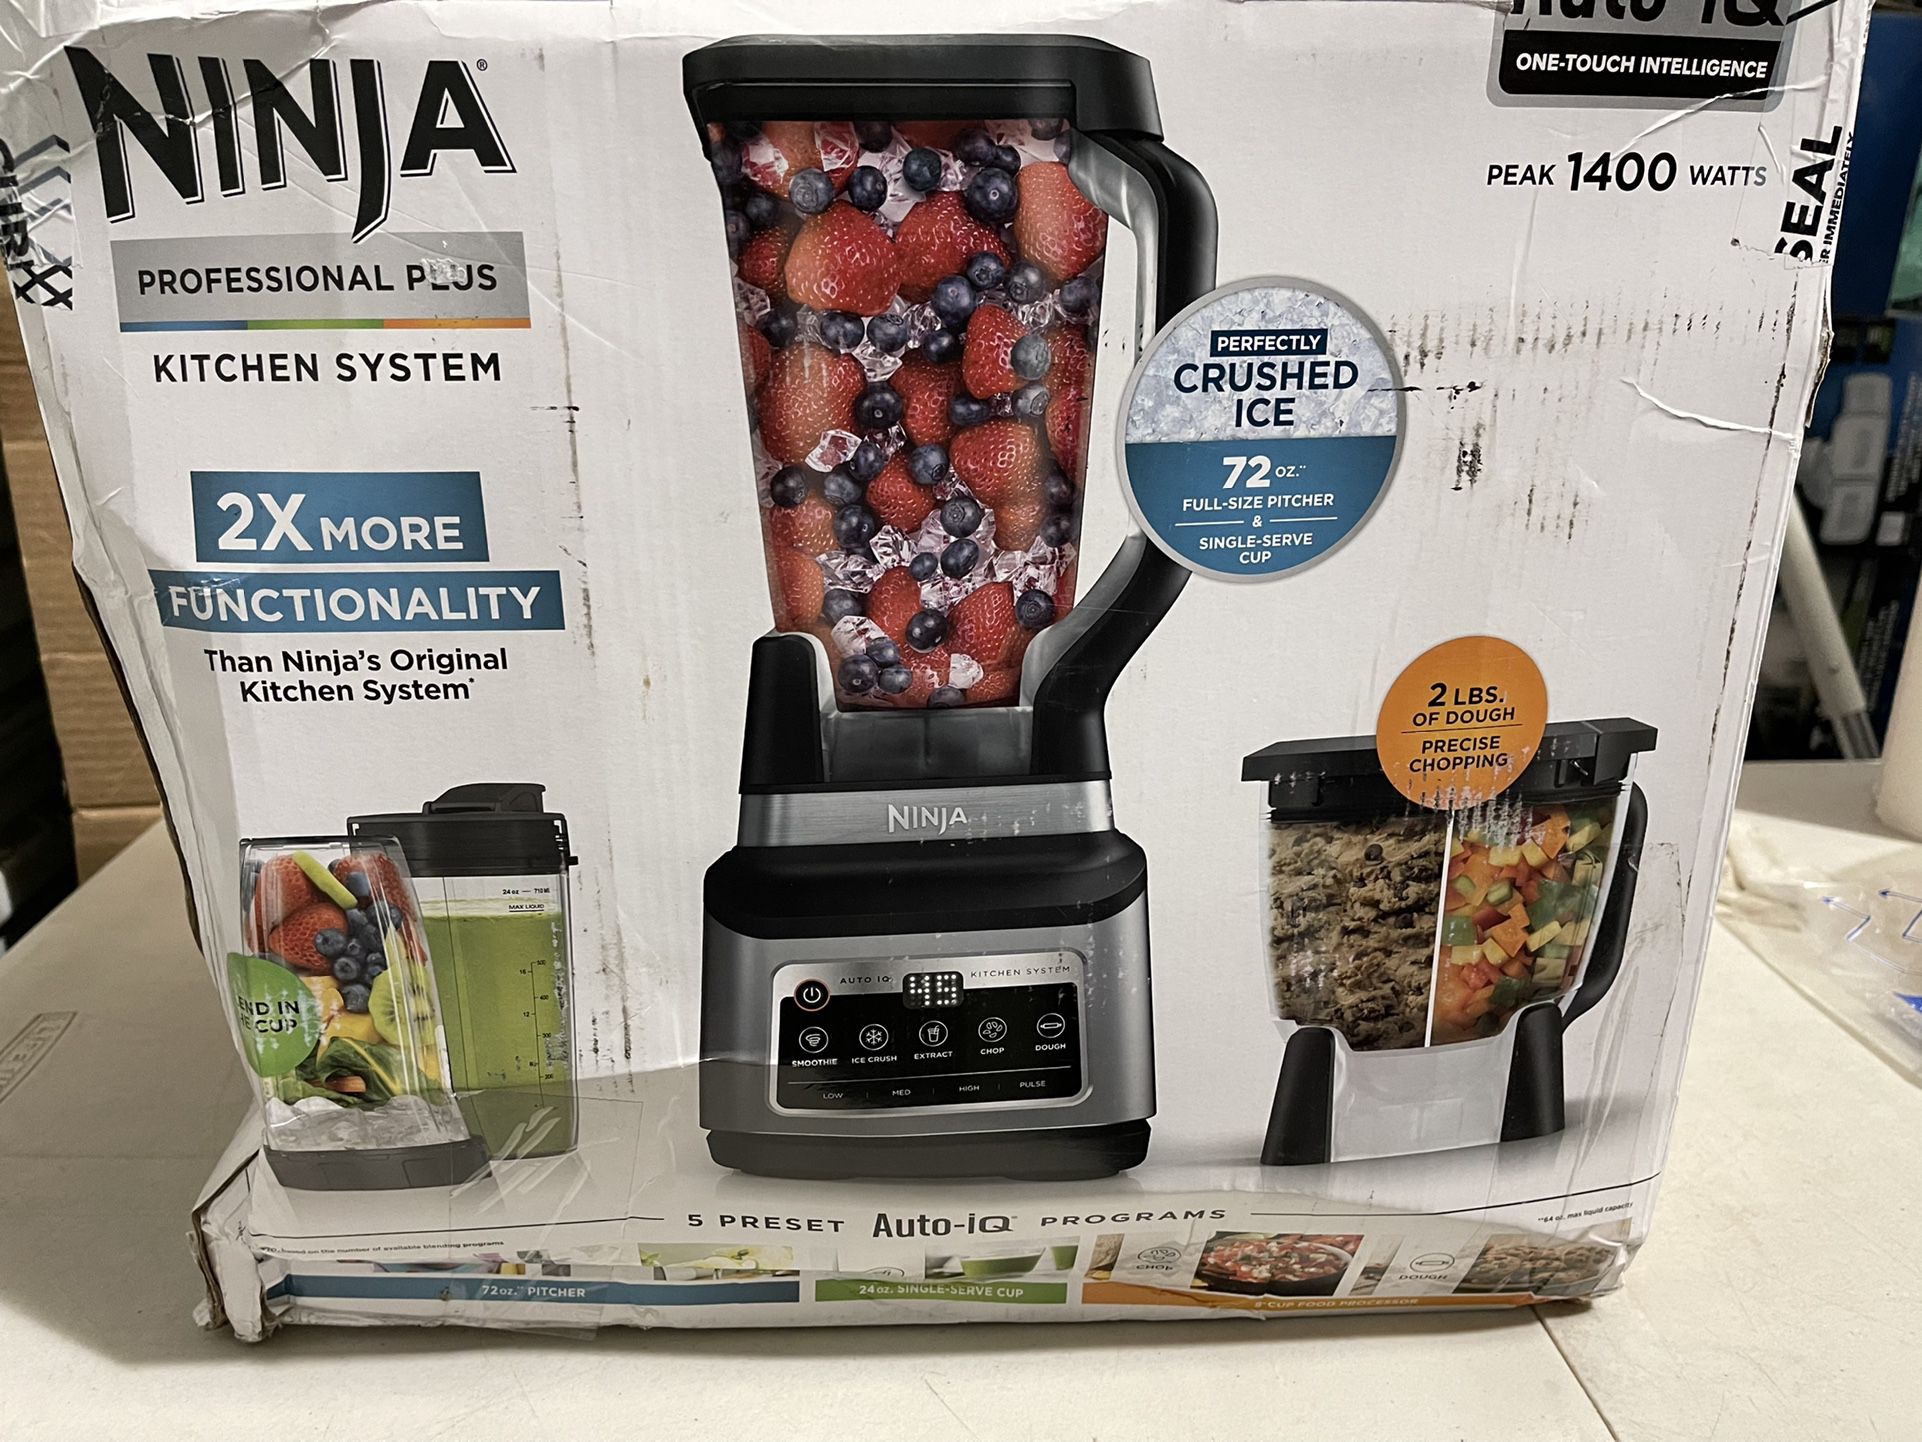 Ninja Foodi Power Mixer System for Sale in Portland, OR - OfferUp